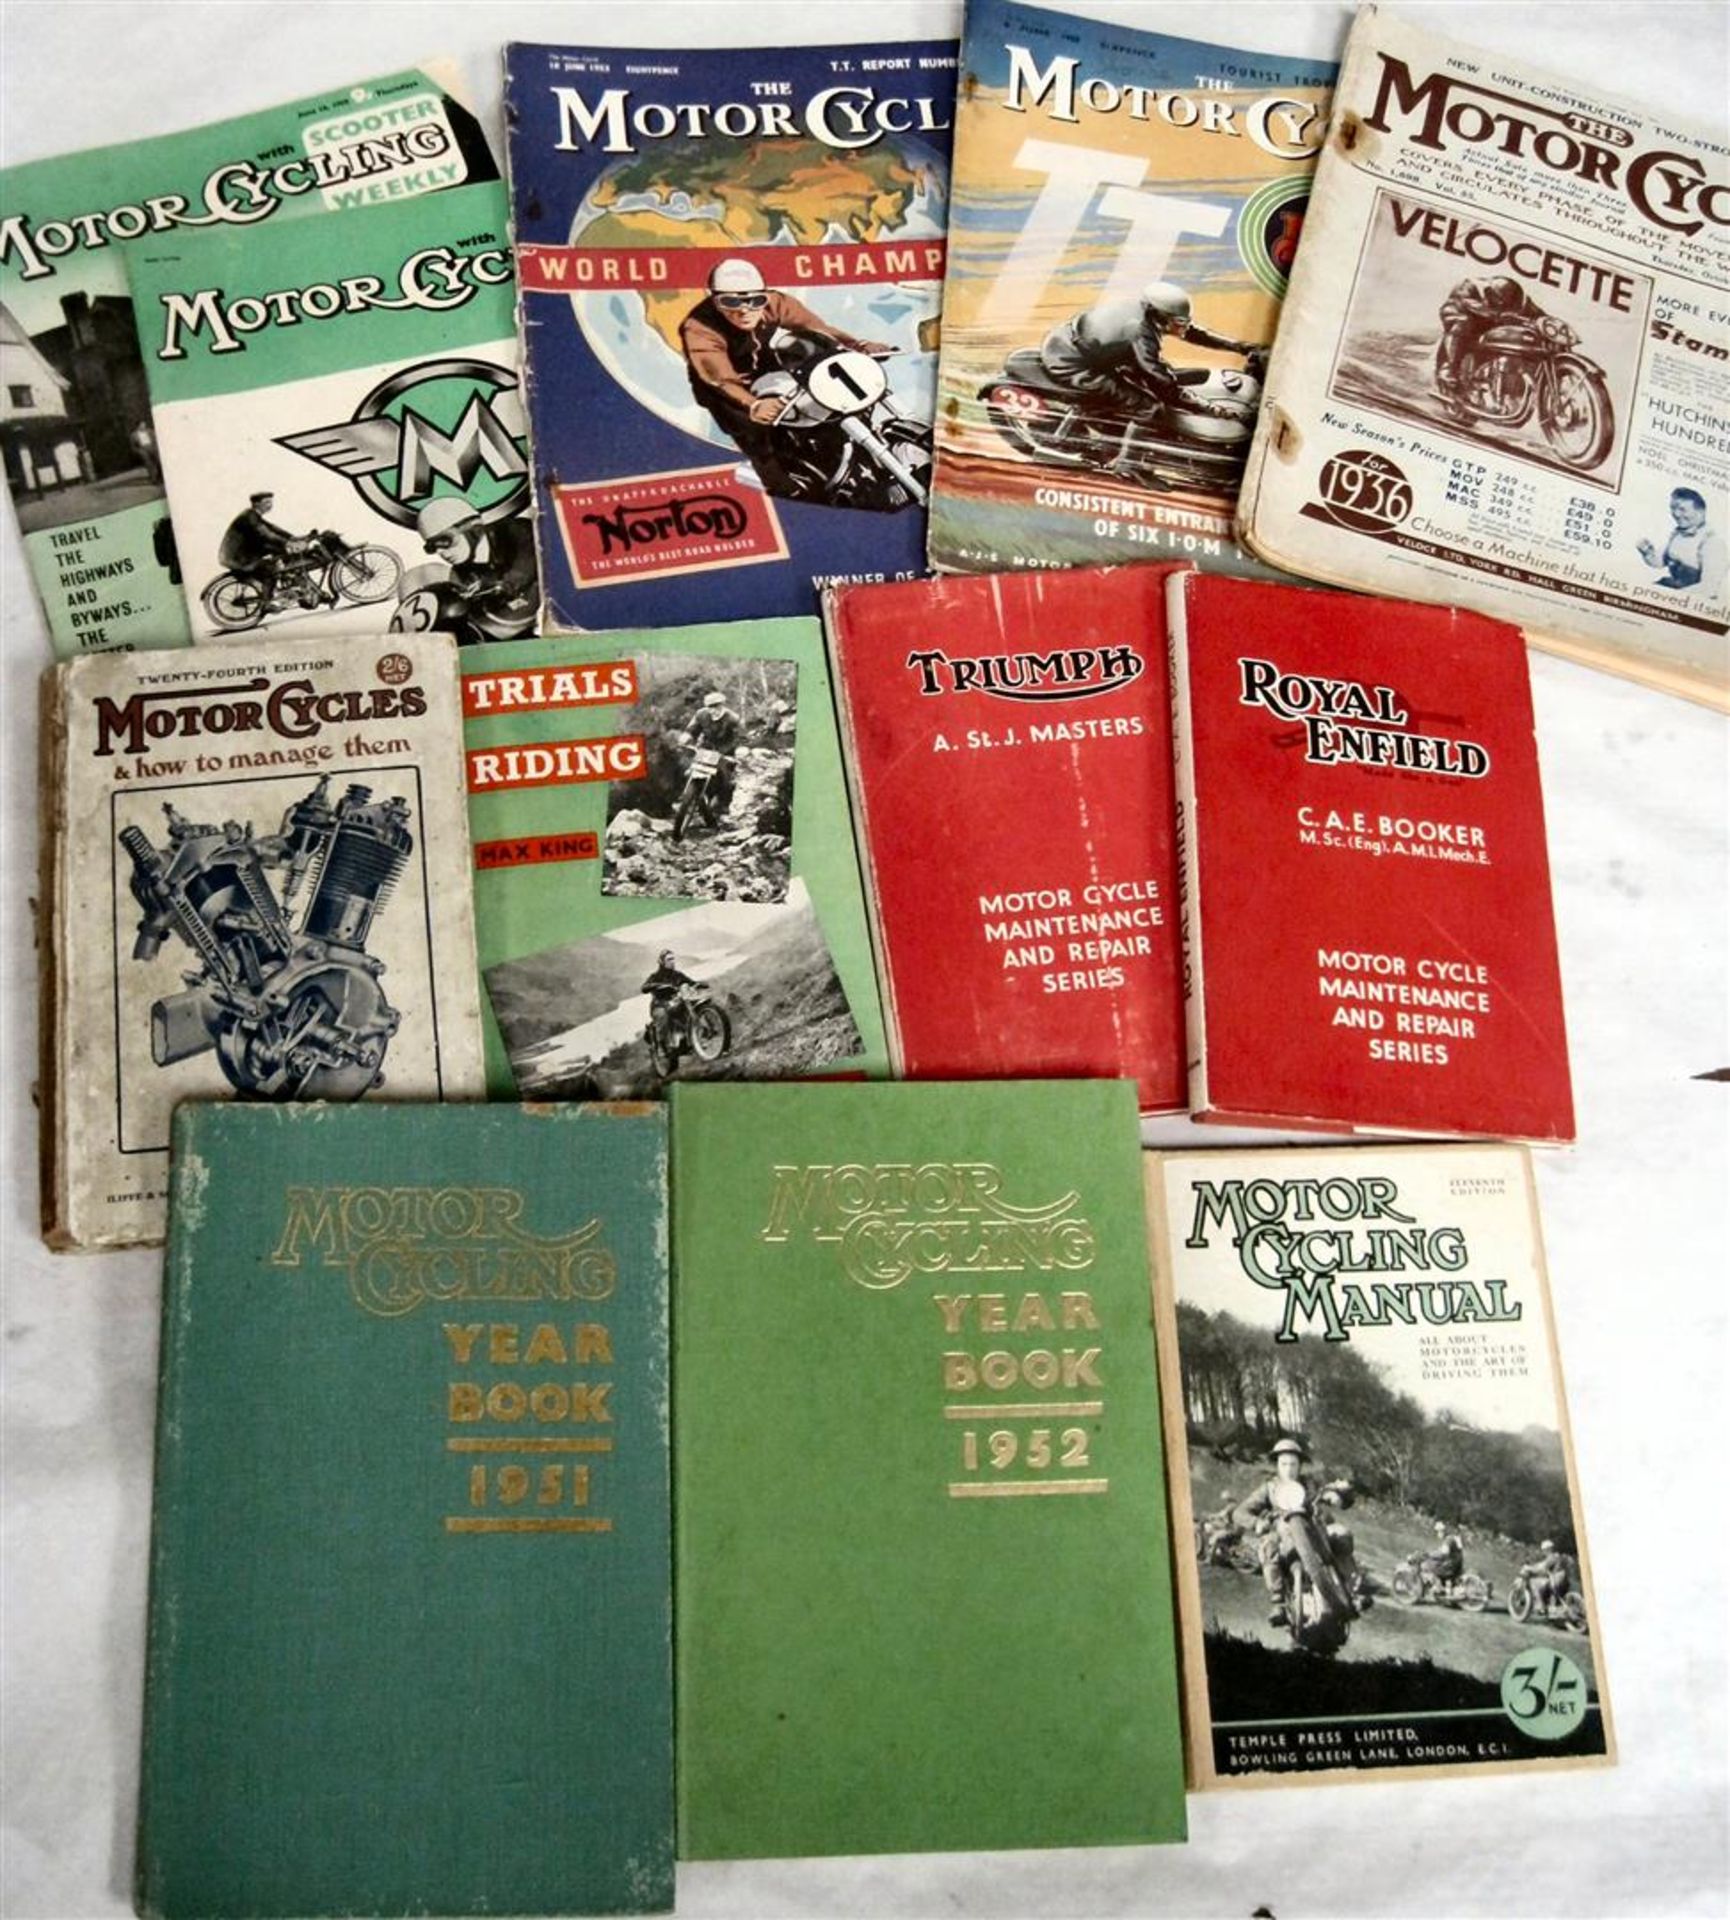 The Motor-Cycle TT numbers for 1950 & 1953 etc t/w 7 period volumes from Motor-Cycling etc